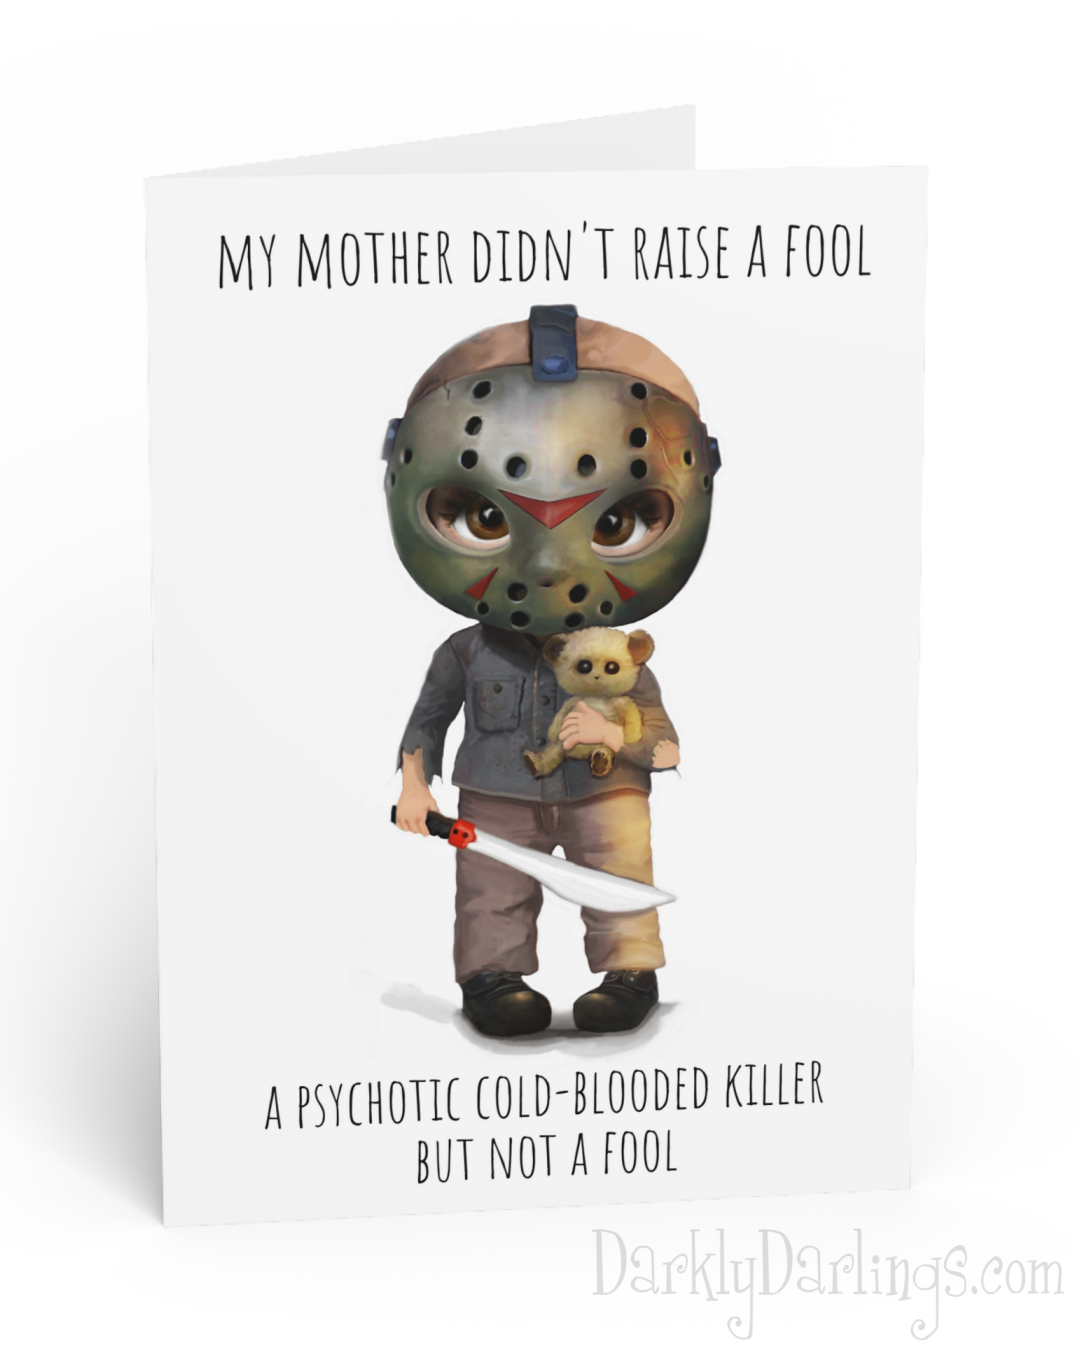 Jason Voorhees card with quote "My mother didn't raise a fool. A psychotic cold-blooded killer, but not a fool."